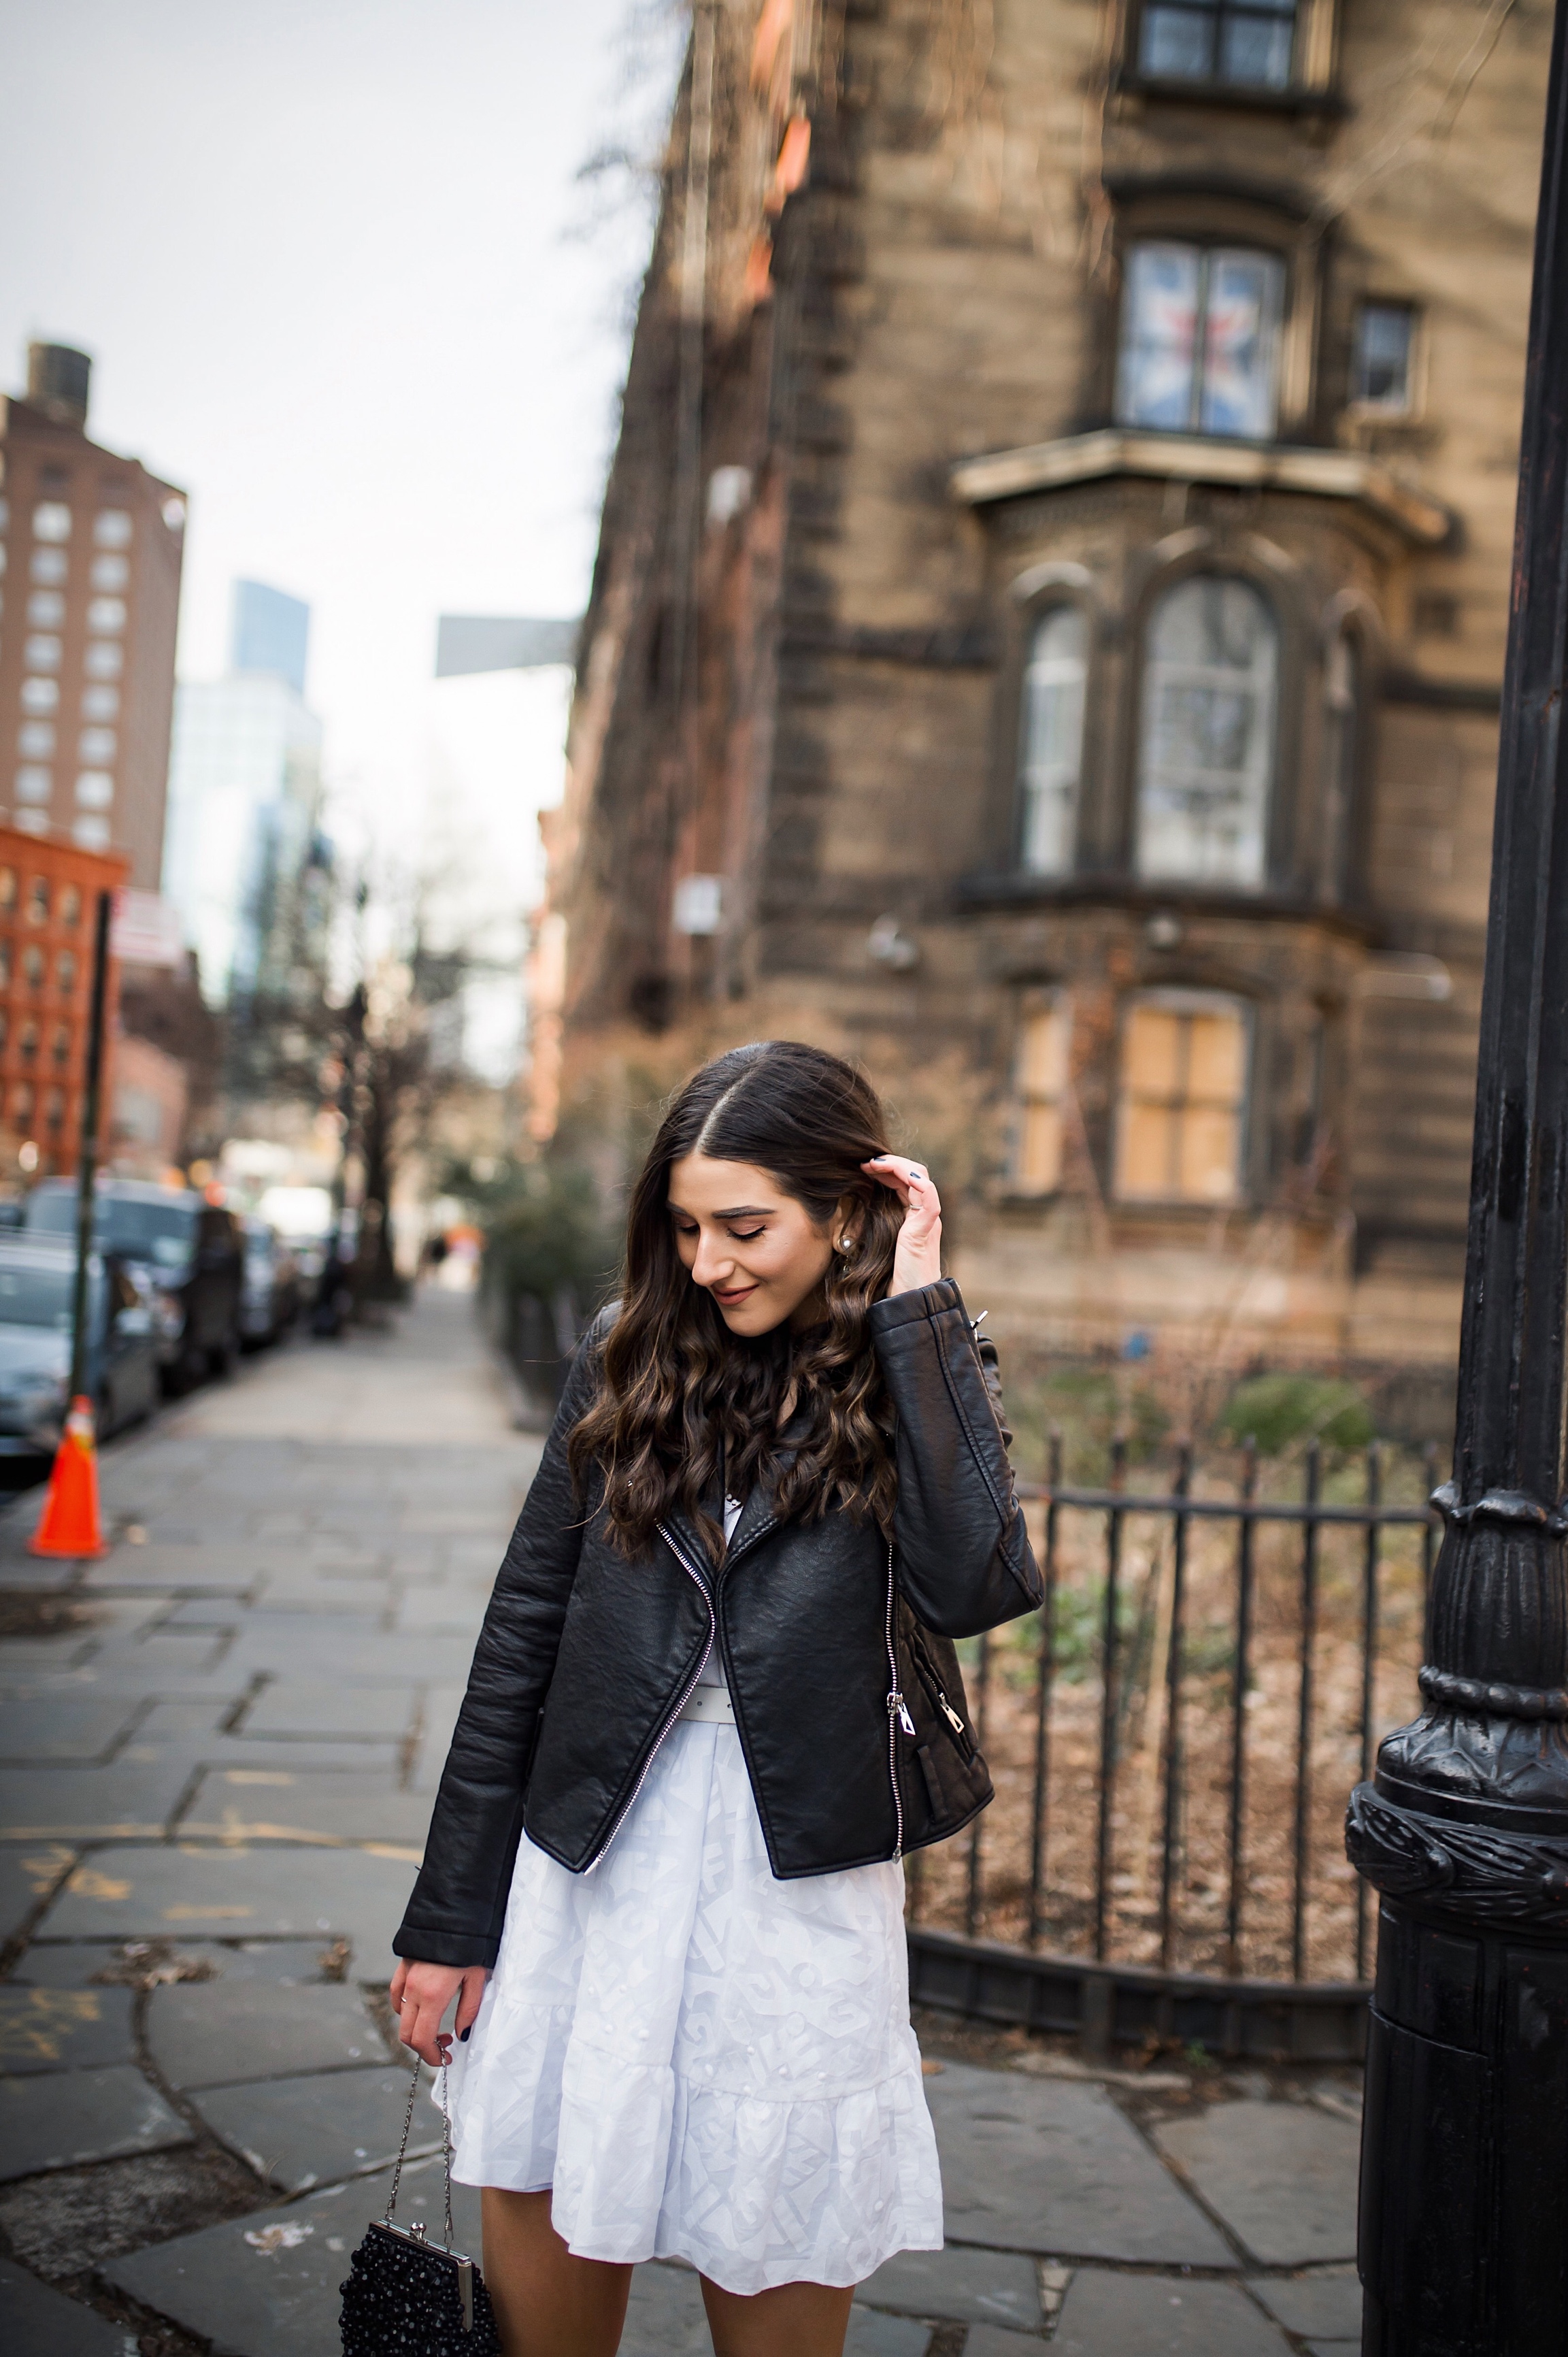 5 Things I Wish Brands Knew White Dress Leather Jacket Esther Santer Fashion Blog NYC Street Style Blogger Outfit OOTD Trendy Shopping Girl What How To Wear  Urban Outfitters ASOS Belt Booties Black Beaded Clutch Long Hair Photoshoot Stuyvesant Shop.JPG